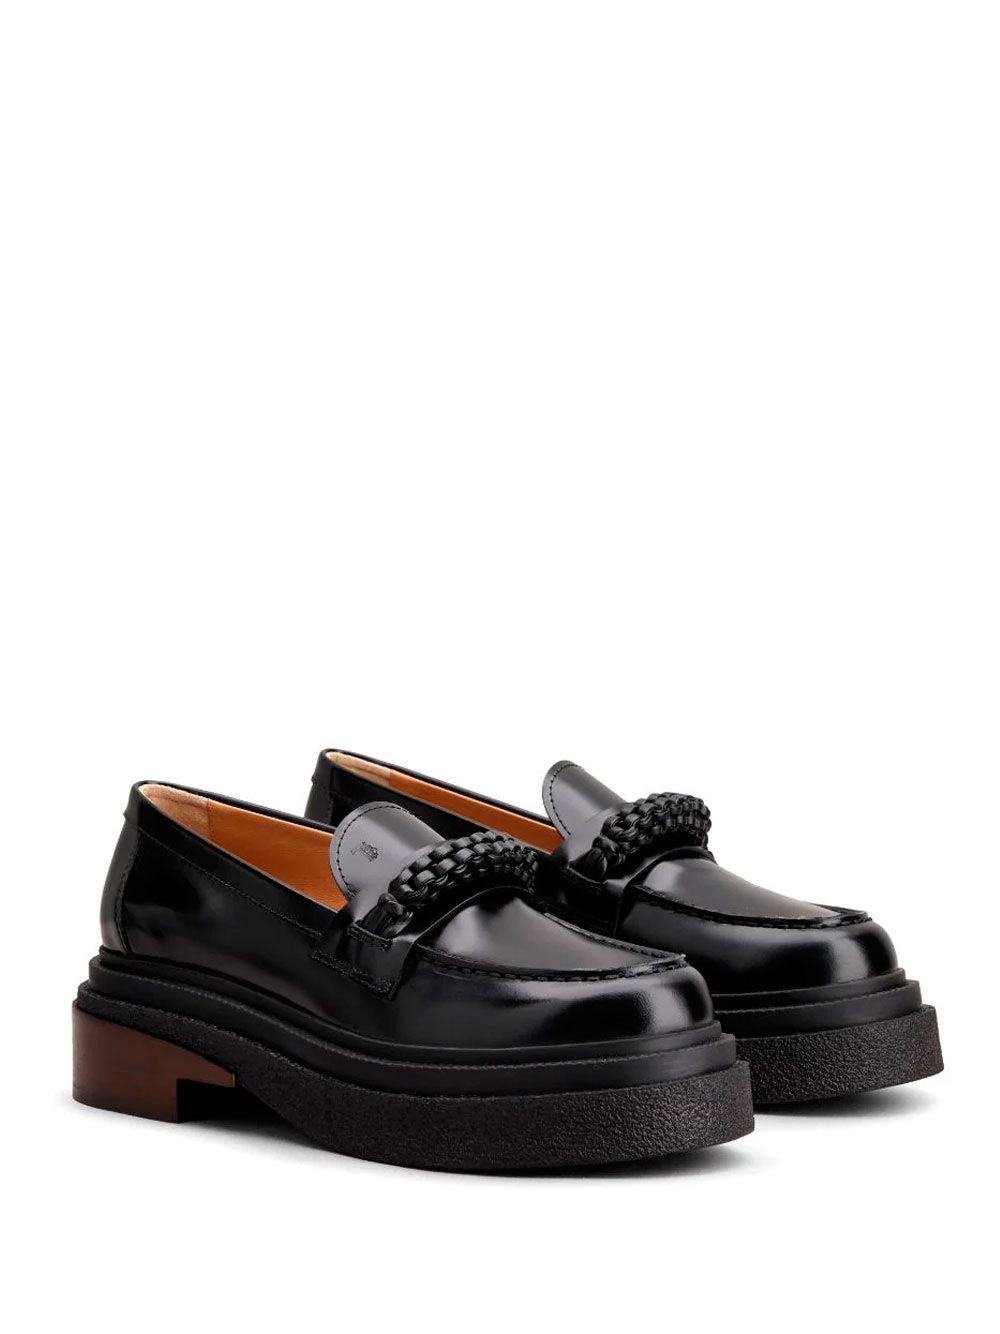 Chain appliqué leather loafers